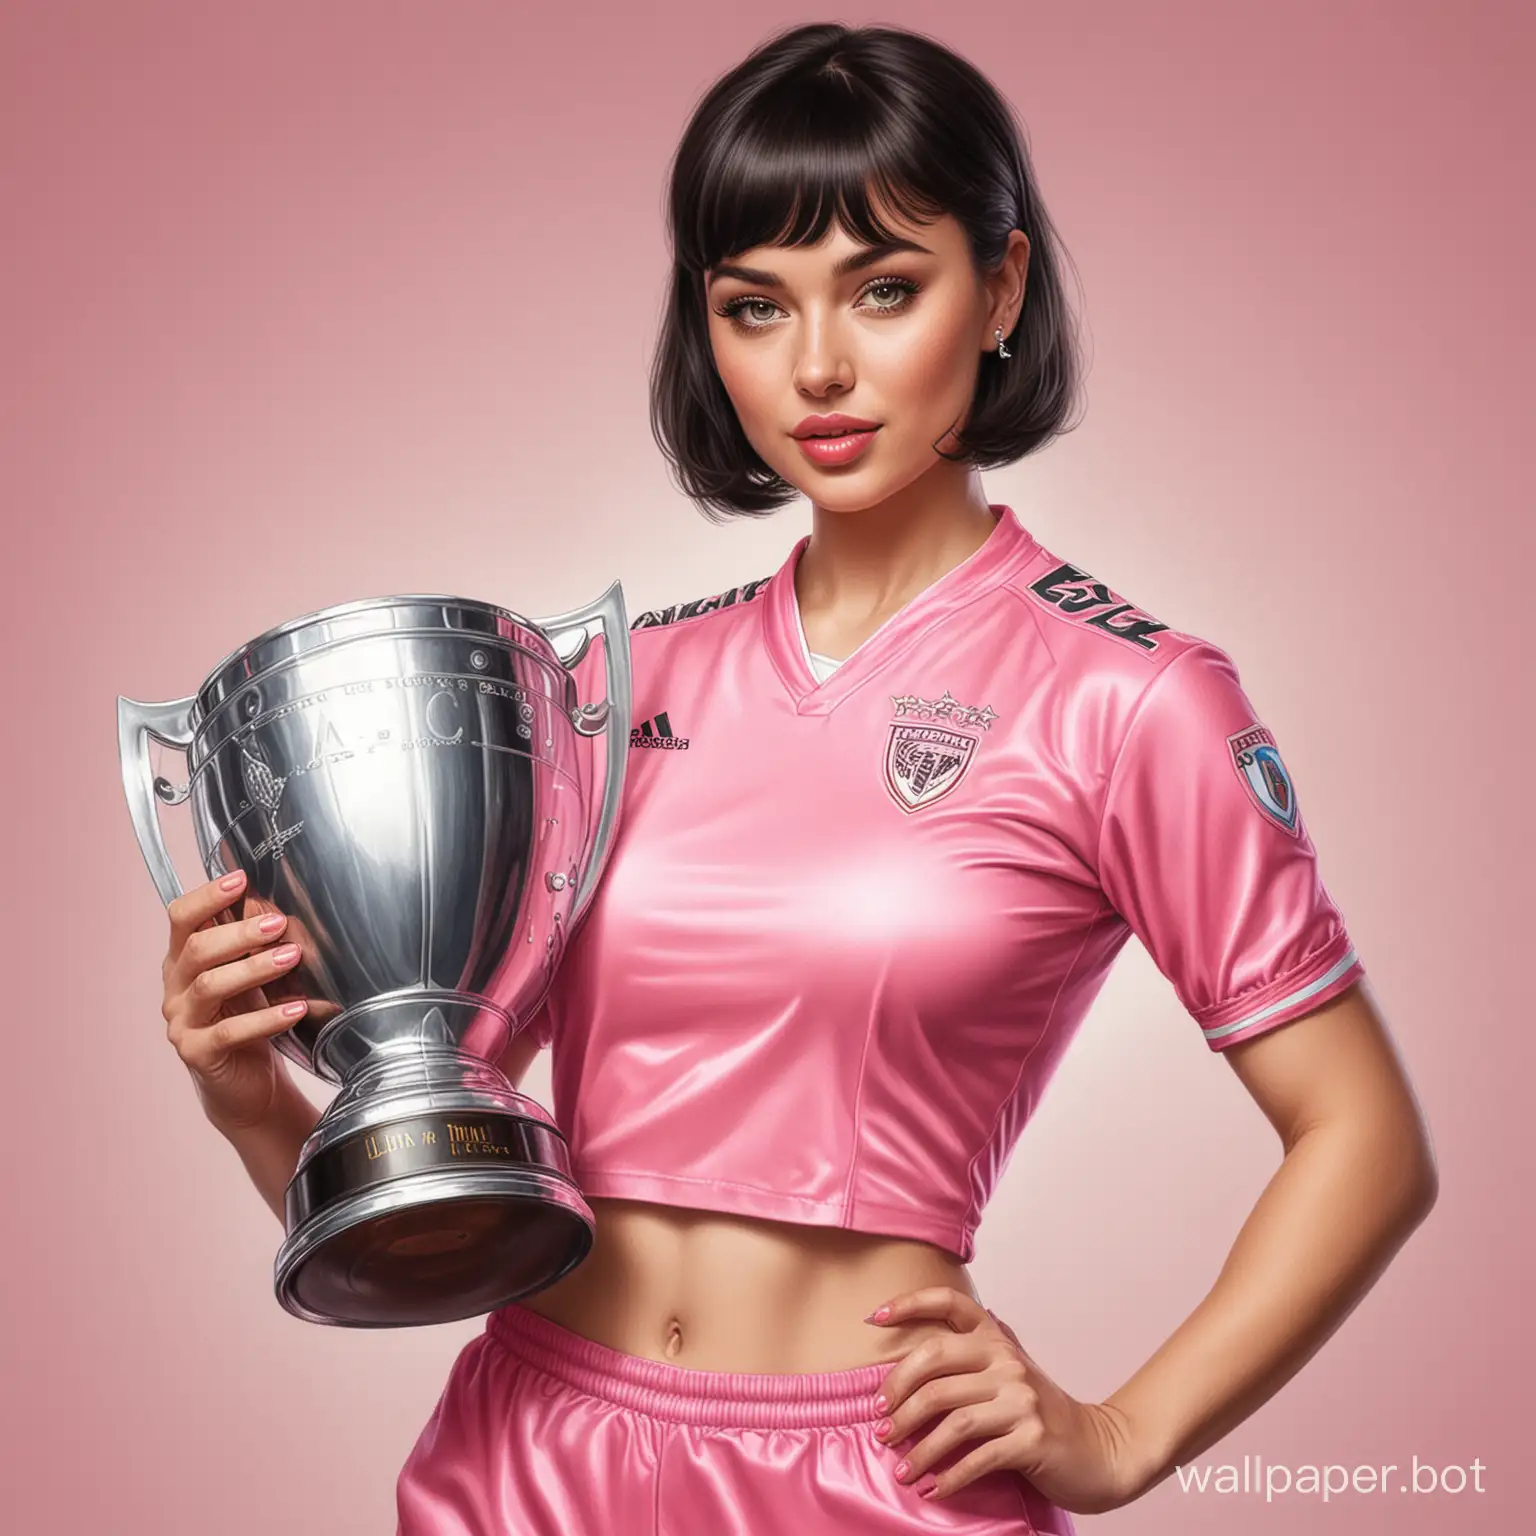 Sketch  Alina Lanina   25 years old dark short hair with bangs    7th breast size  narrow waist  in pink  football uniform, holding a large Champions Cup  on a white background   highly realistic drawing with colored pencil  pinup